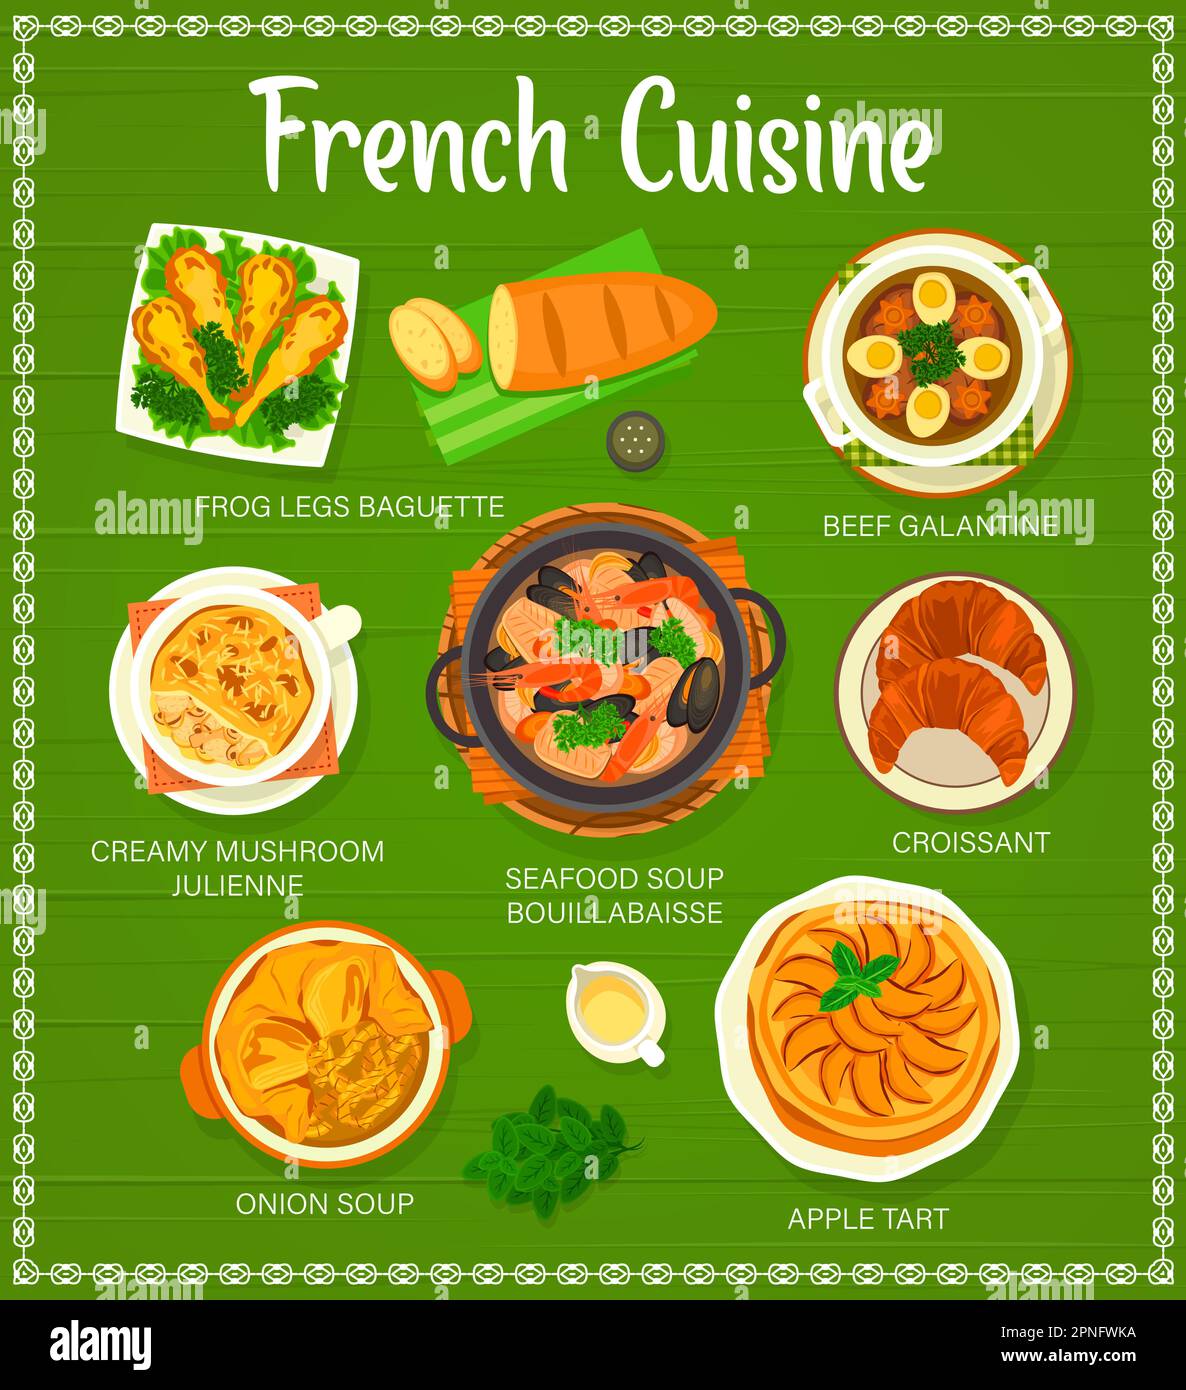 French cuisine menu for restaurant, lunch and dinner dishes of France ...